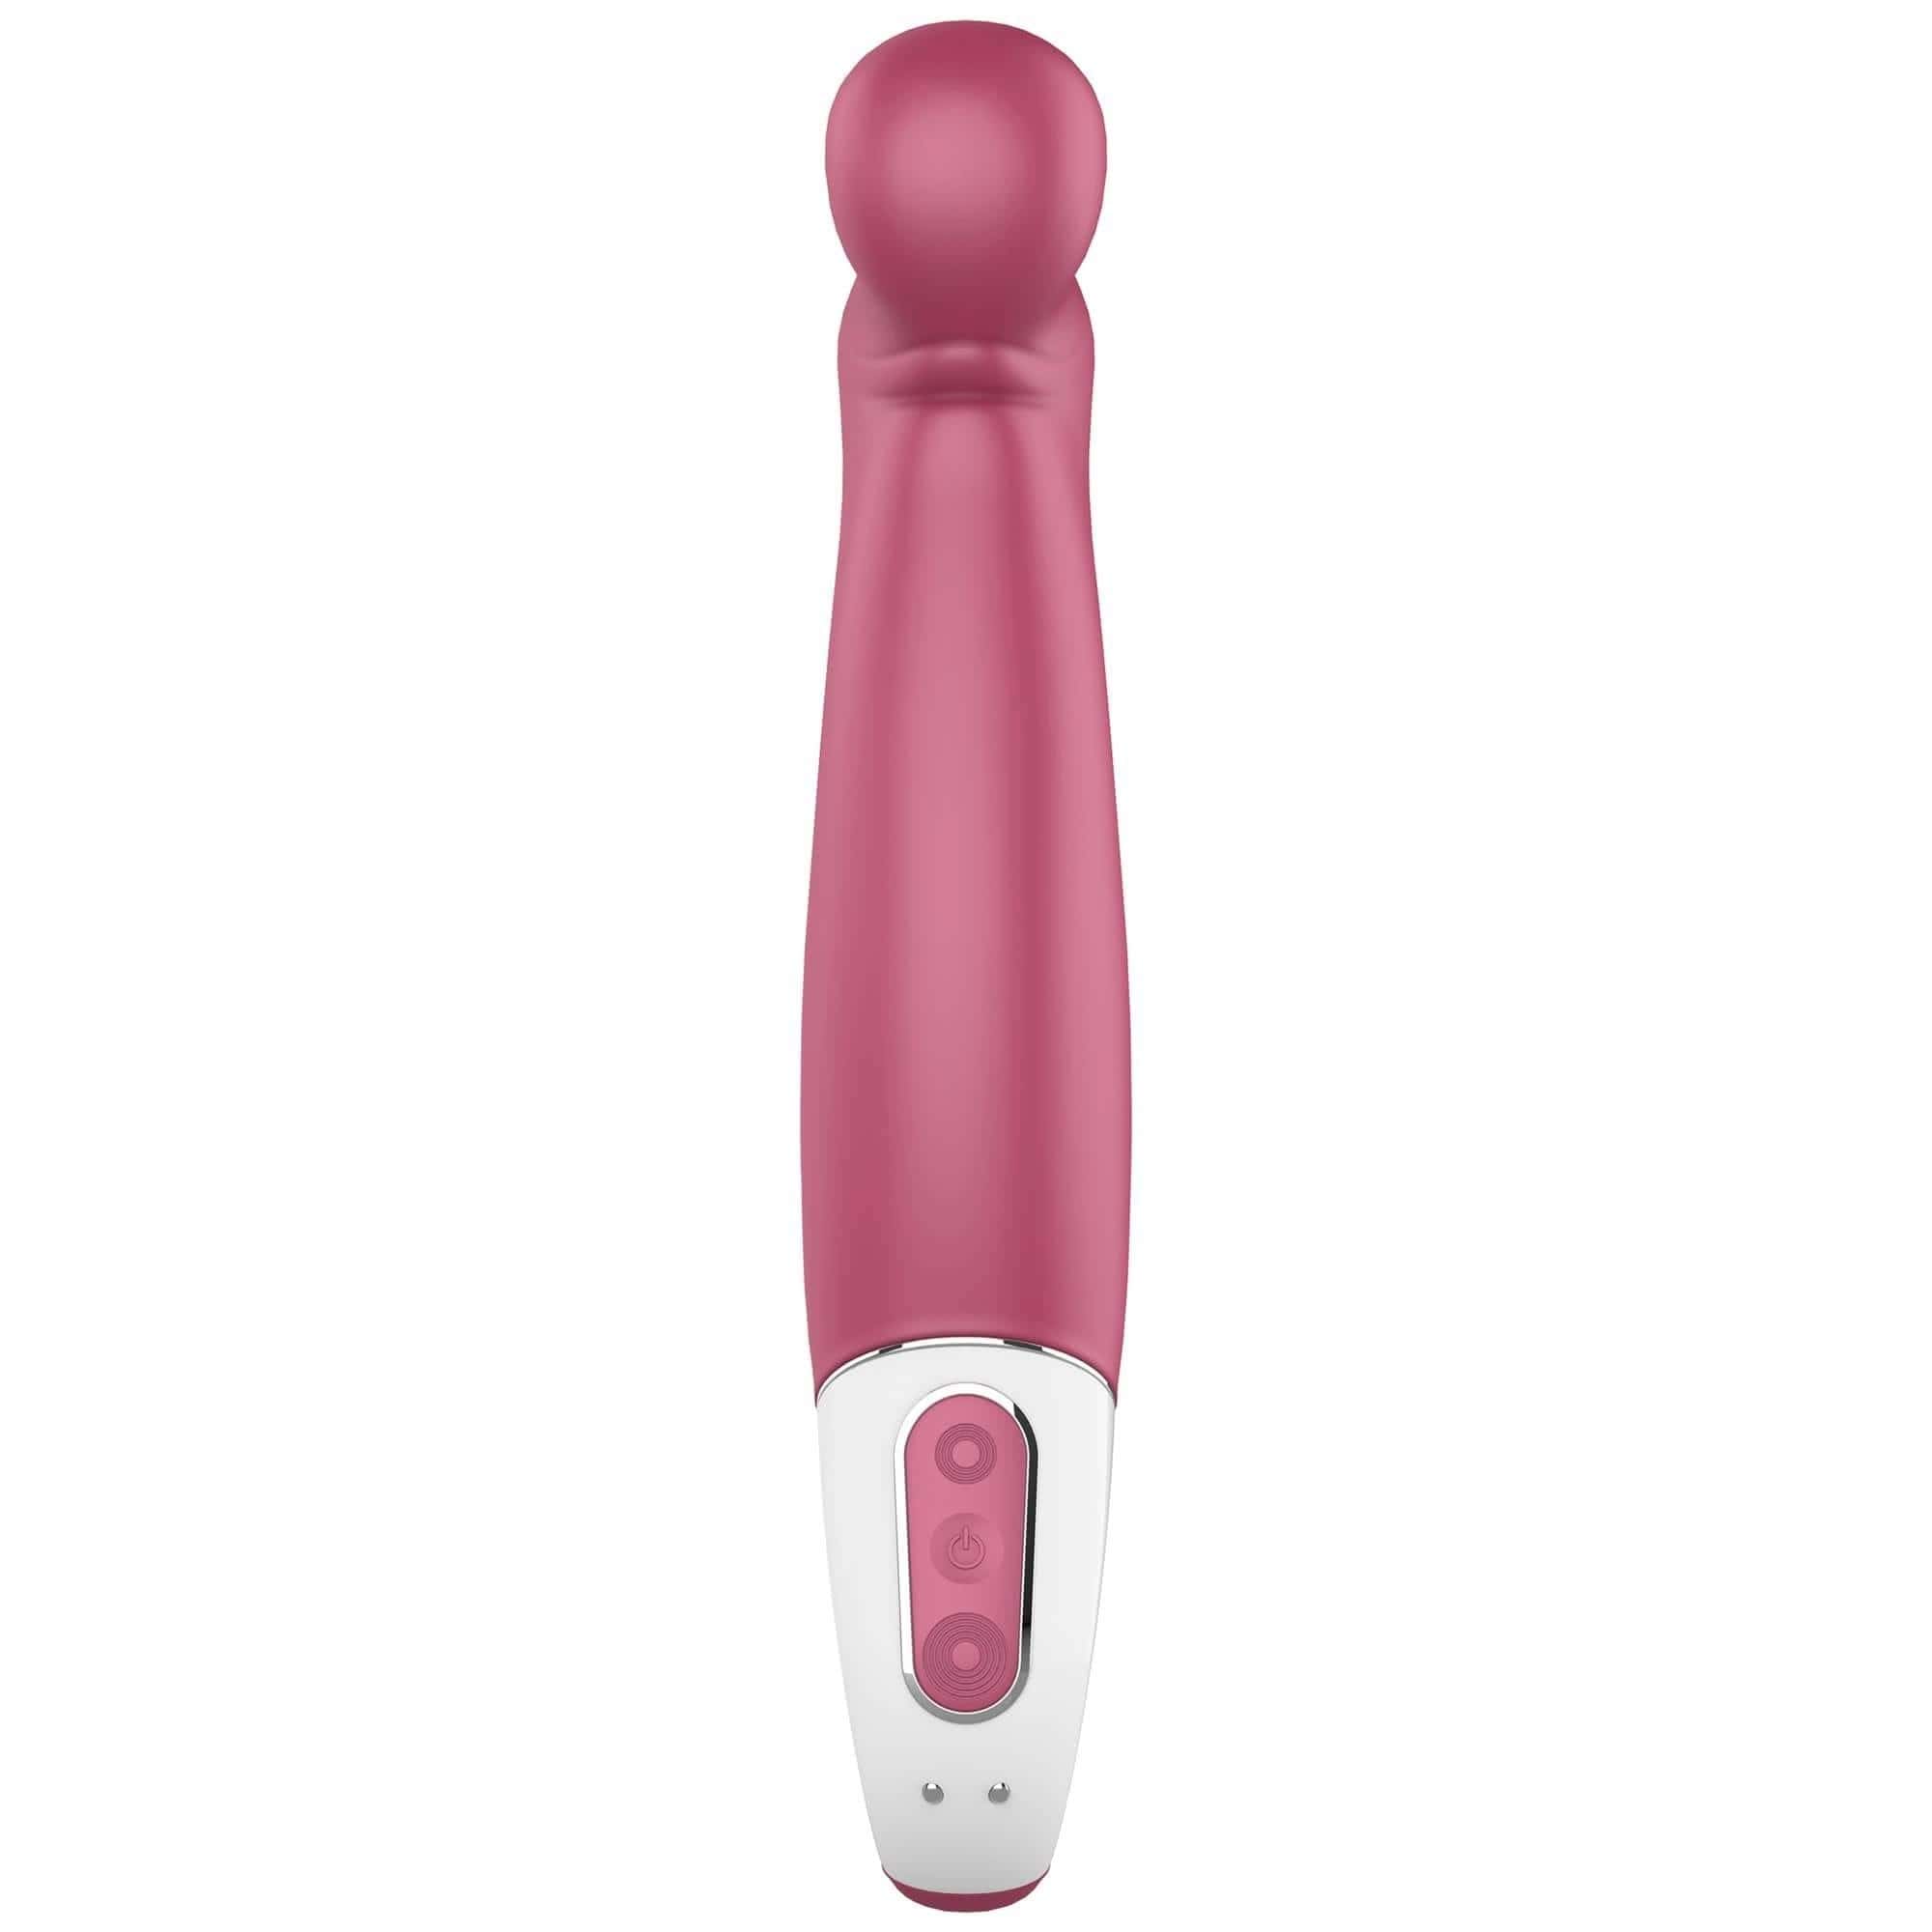 Satisfyer Vibes Petting Hippo Rechargeable GSpot Vibrator